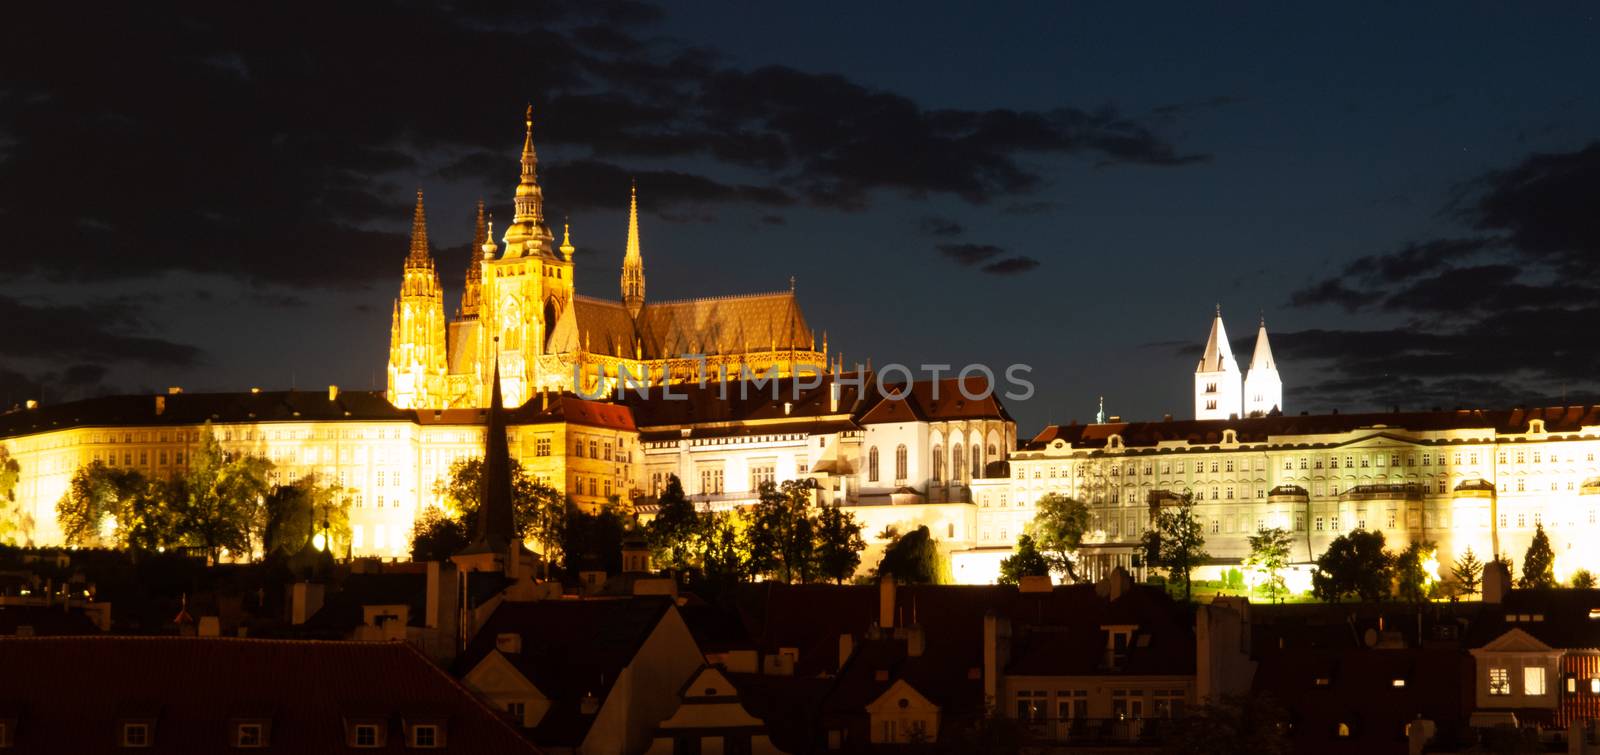 Hradcany with Prague Castle and St Vitus Cathedral by night. Prague, Czech Republic by pyty